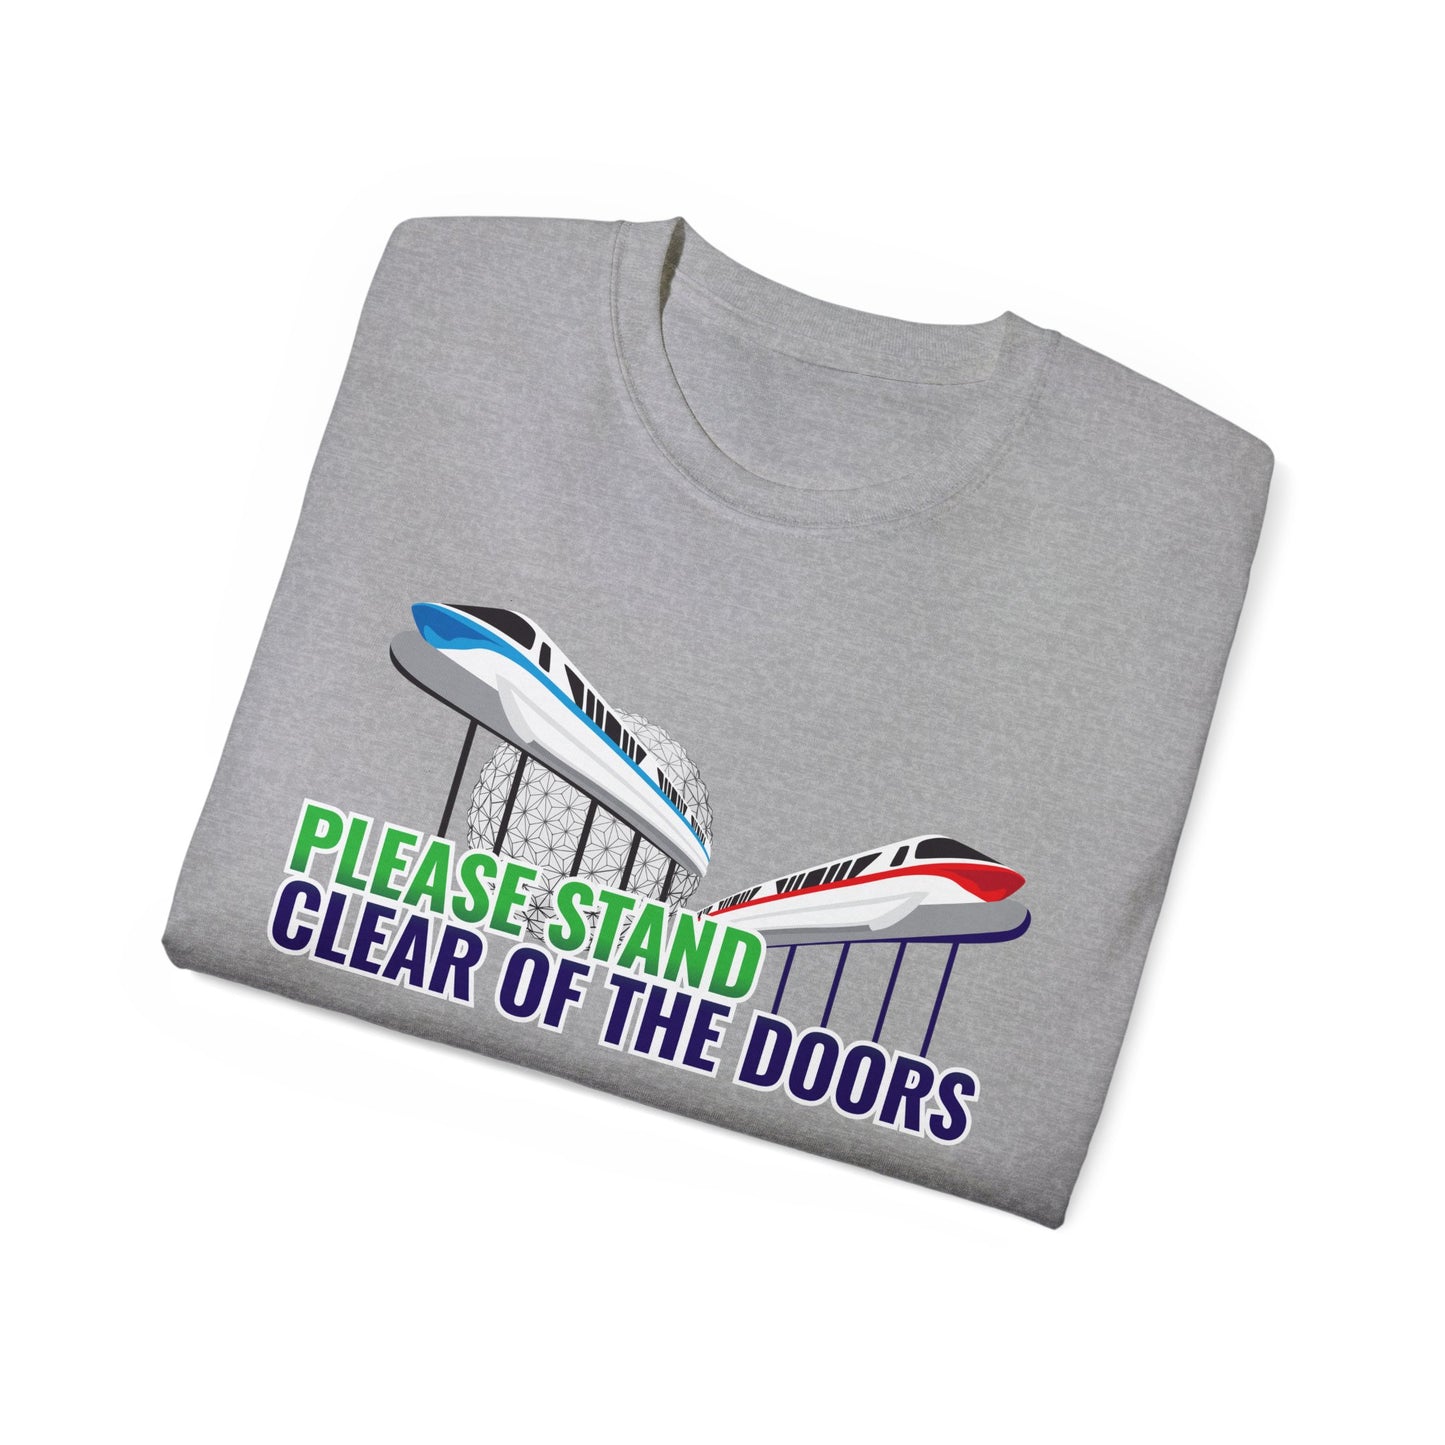 Please Stand Clear Of The Doors Unisex Graphic Tee